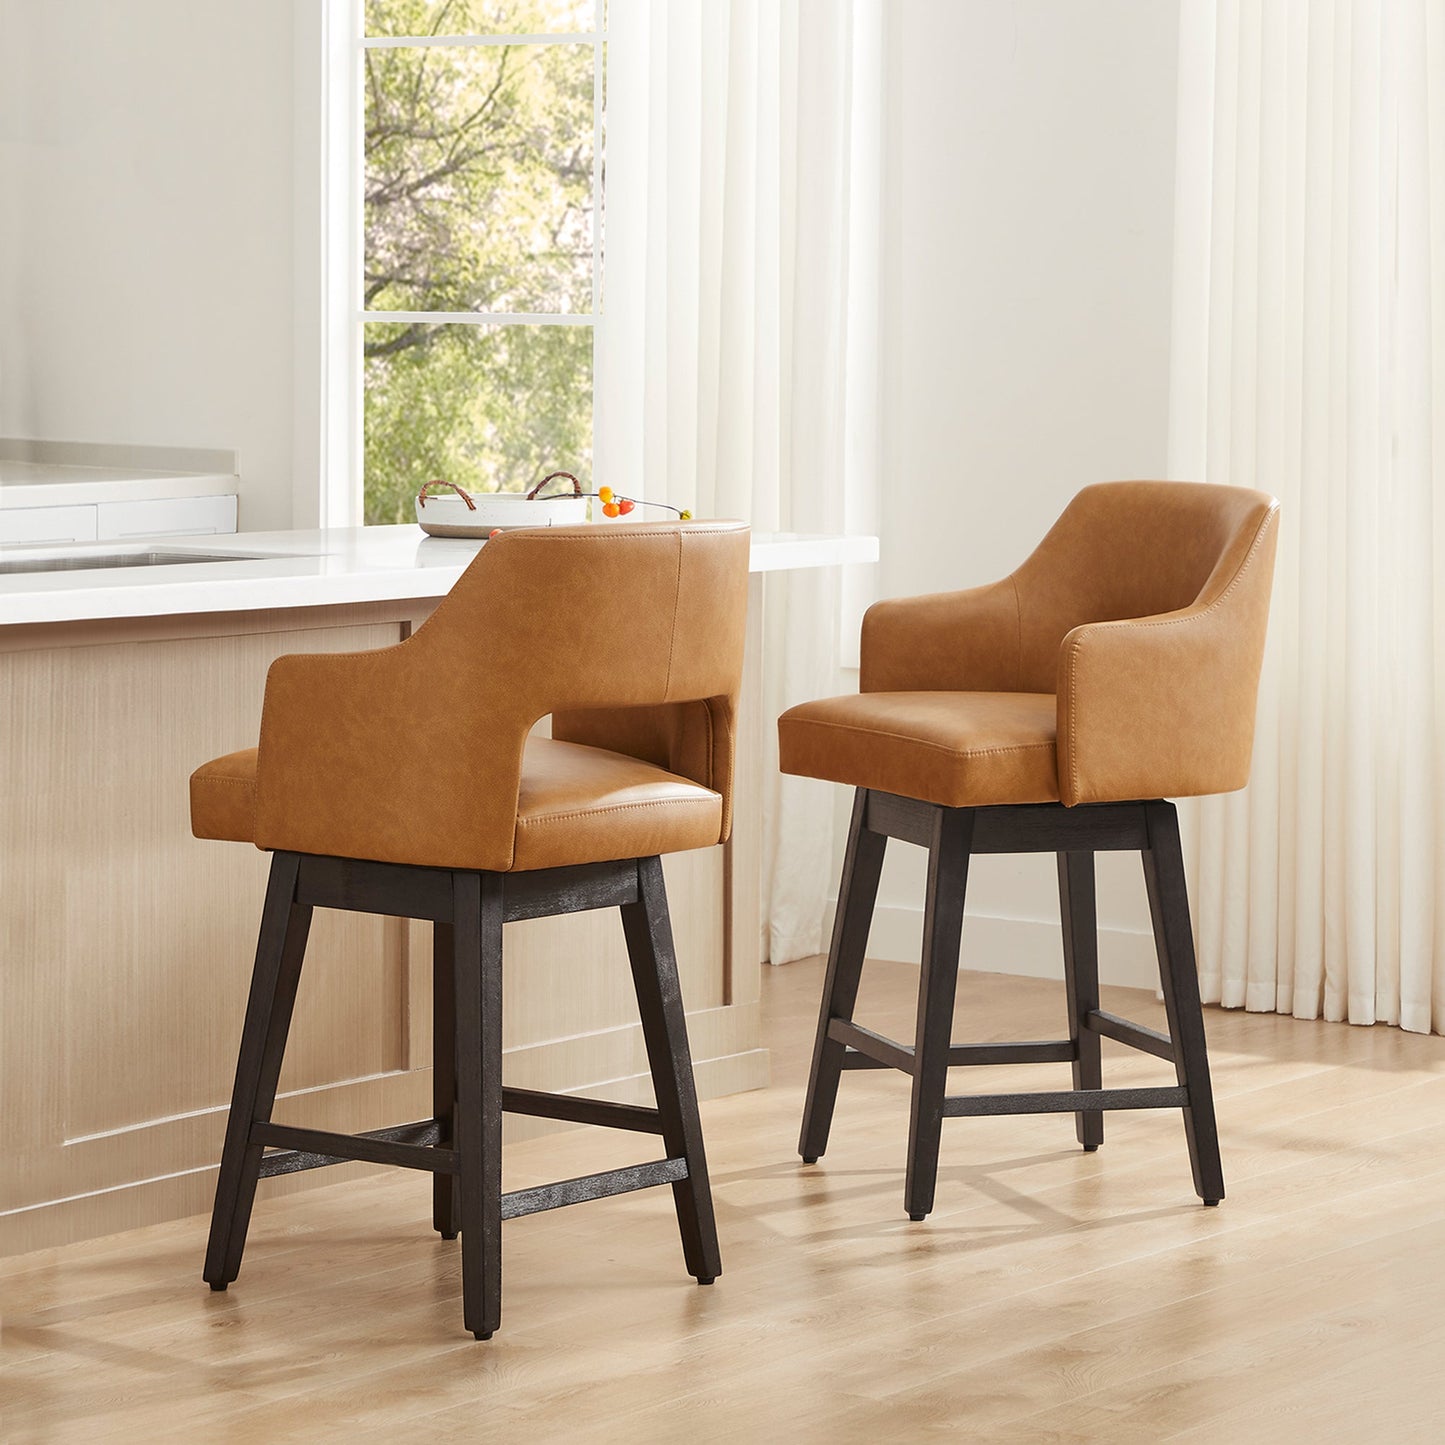 CHITA LIVING-Ava Swivel Counter Stool ( Set of 2 )-Counter Stools-Faux Leather-Cognac-